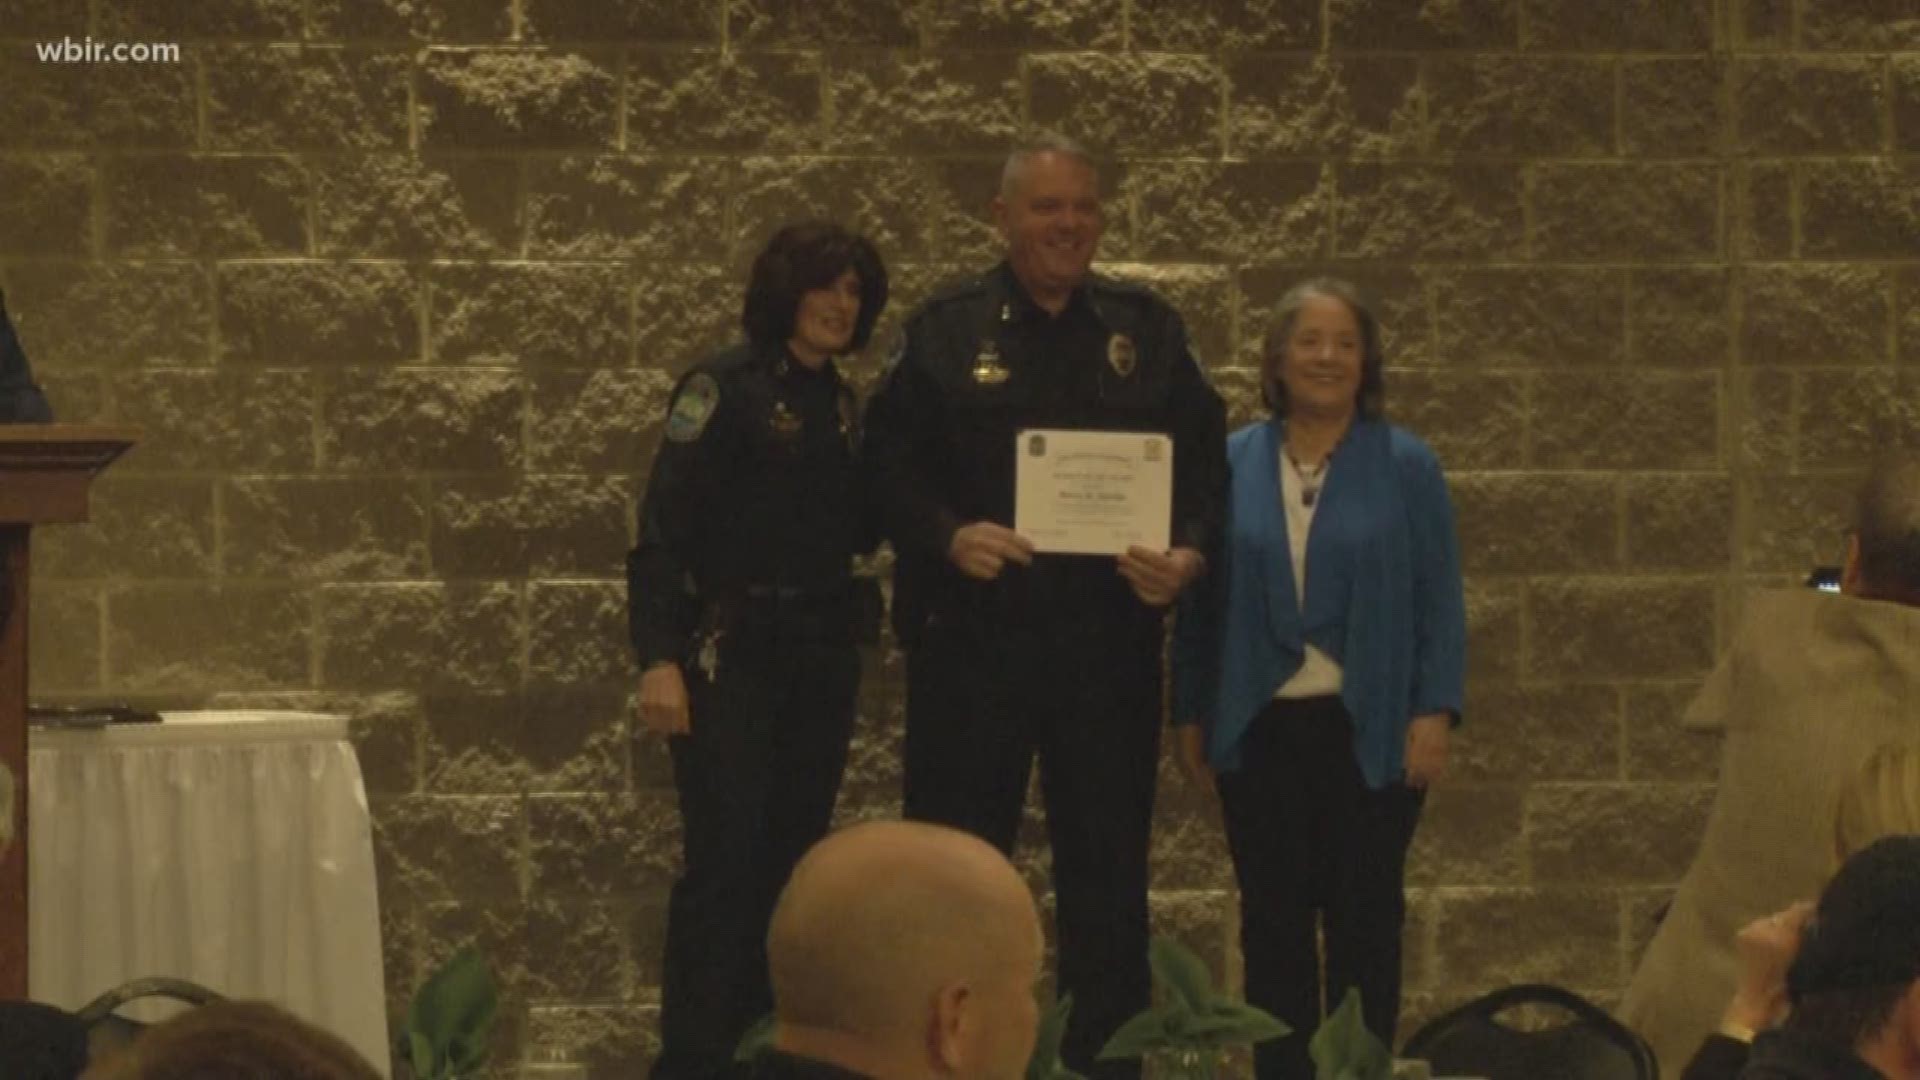 The Knoxville Police Department today awarded Officer B.K Hardin its Purple Heart award. Police say Hardin was directing traffic in Fort Sanders back in November after a game when someone hit him with a hammer or tire iron from behind, fracturing his skull. Knoxville police also honored Cody Griffith who was at the scene and did what he could to help that injured officer.